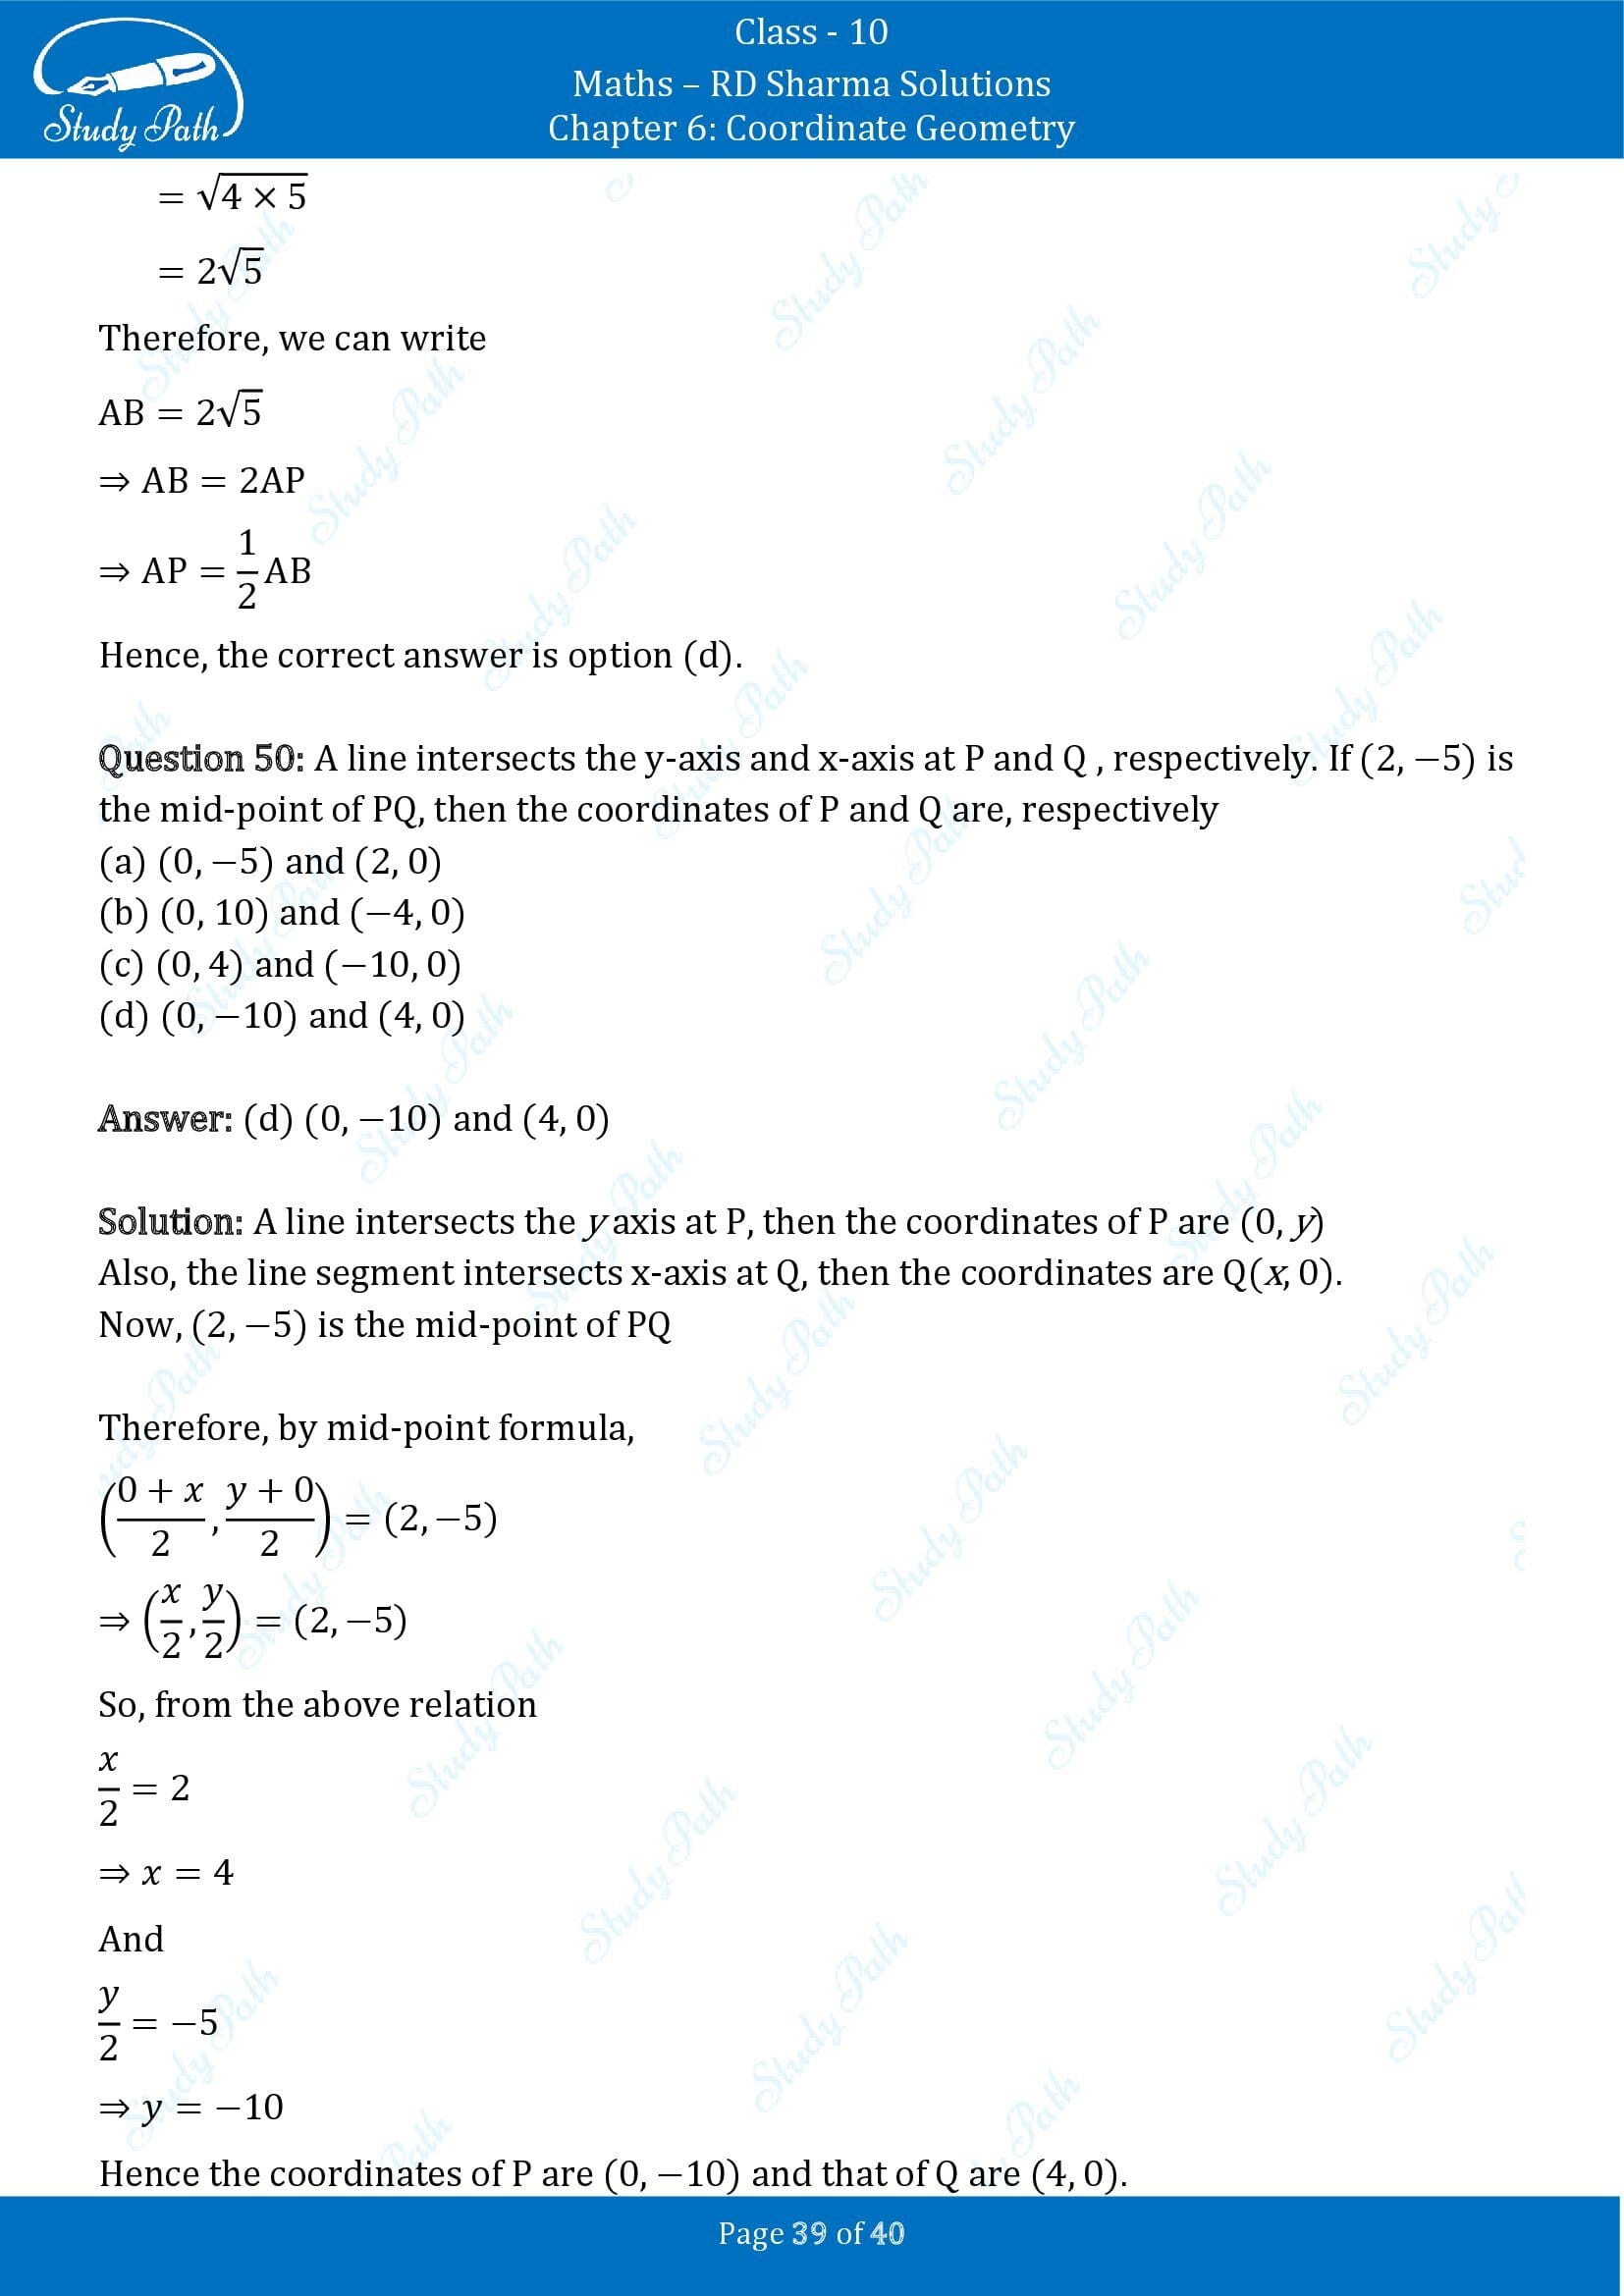 RD Sharma Solutions Class 10 Chapter 6 Coordinate Geometry Multiple Choice Question MCQs 00039